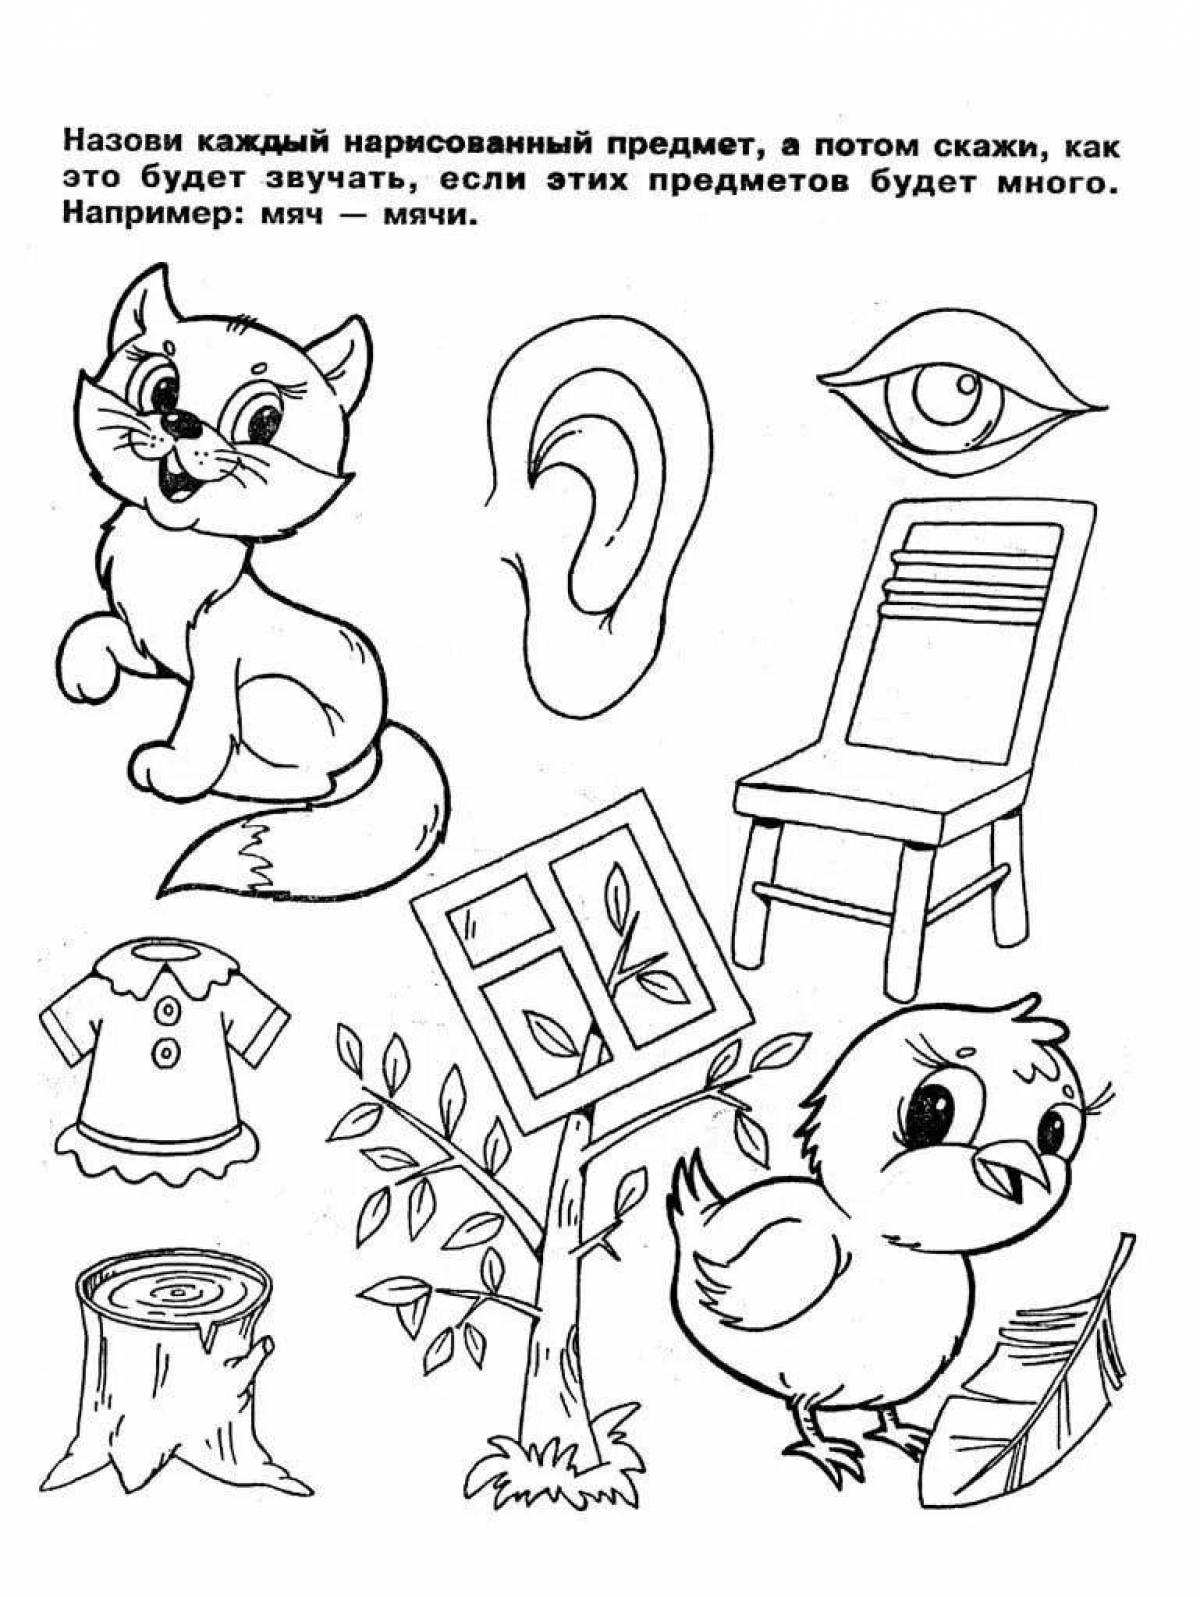 An entertaining coloring book for children, developing